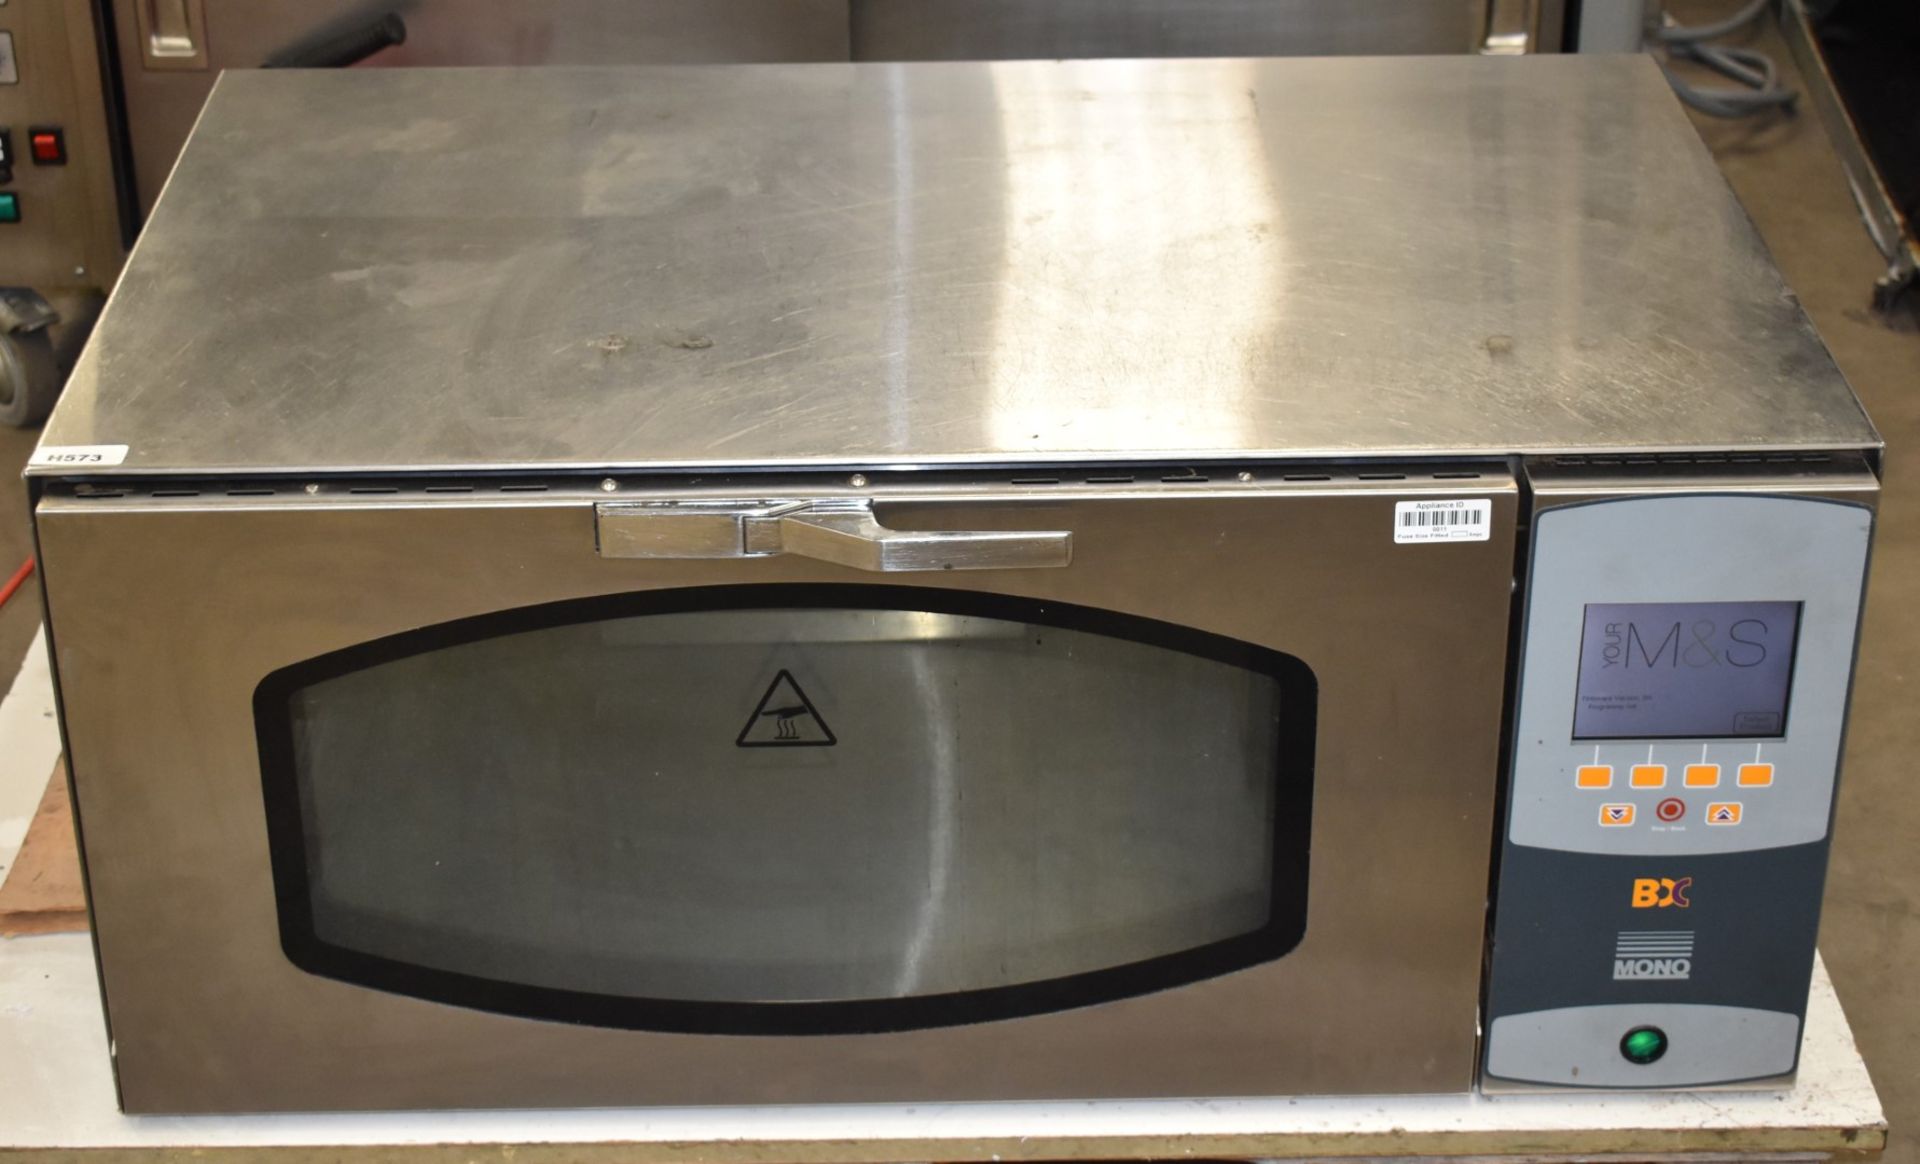 1 x Mono FG156-A12 Baking Convection Oven With Stainless Steel Exterior and Colour Screen Display